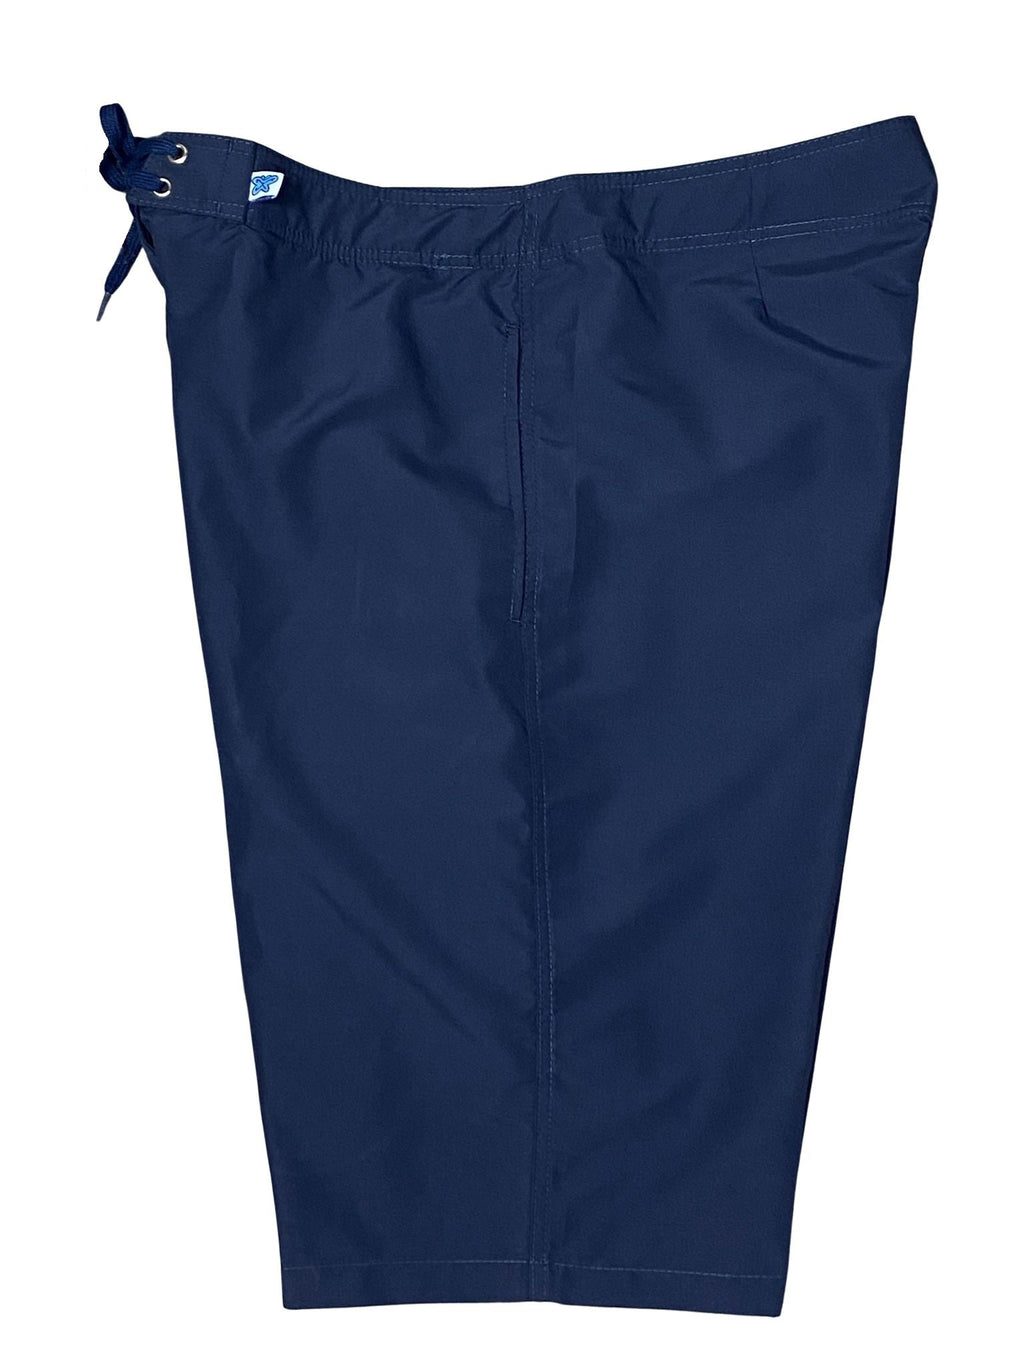 Solid Navy Swim Clamdiggers - Board Shorts World Outlet